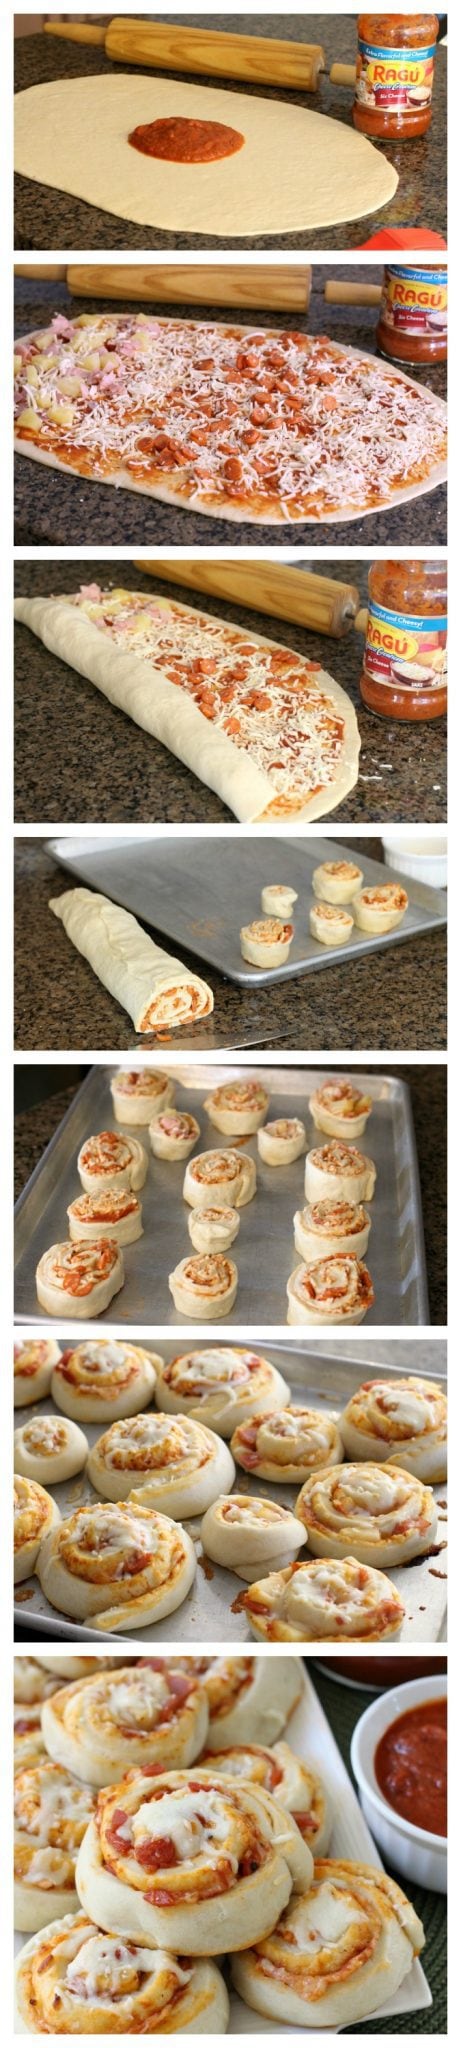 Pizza Pinwheels are made from a soft, homemade dough with delicious toppings inside and melted cheese on top, they are an amazing weeknight meal!